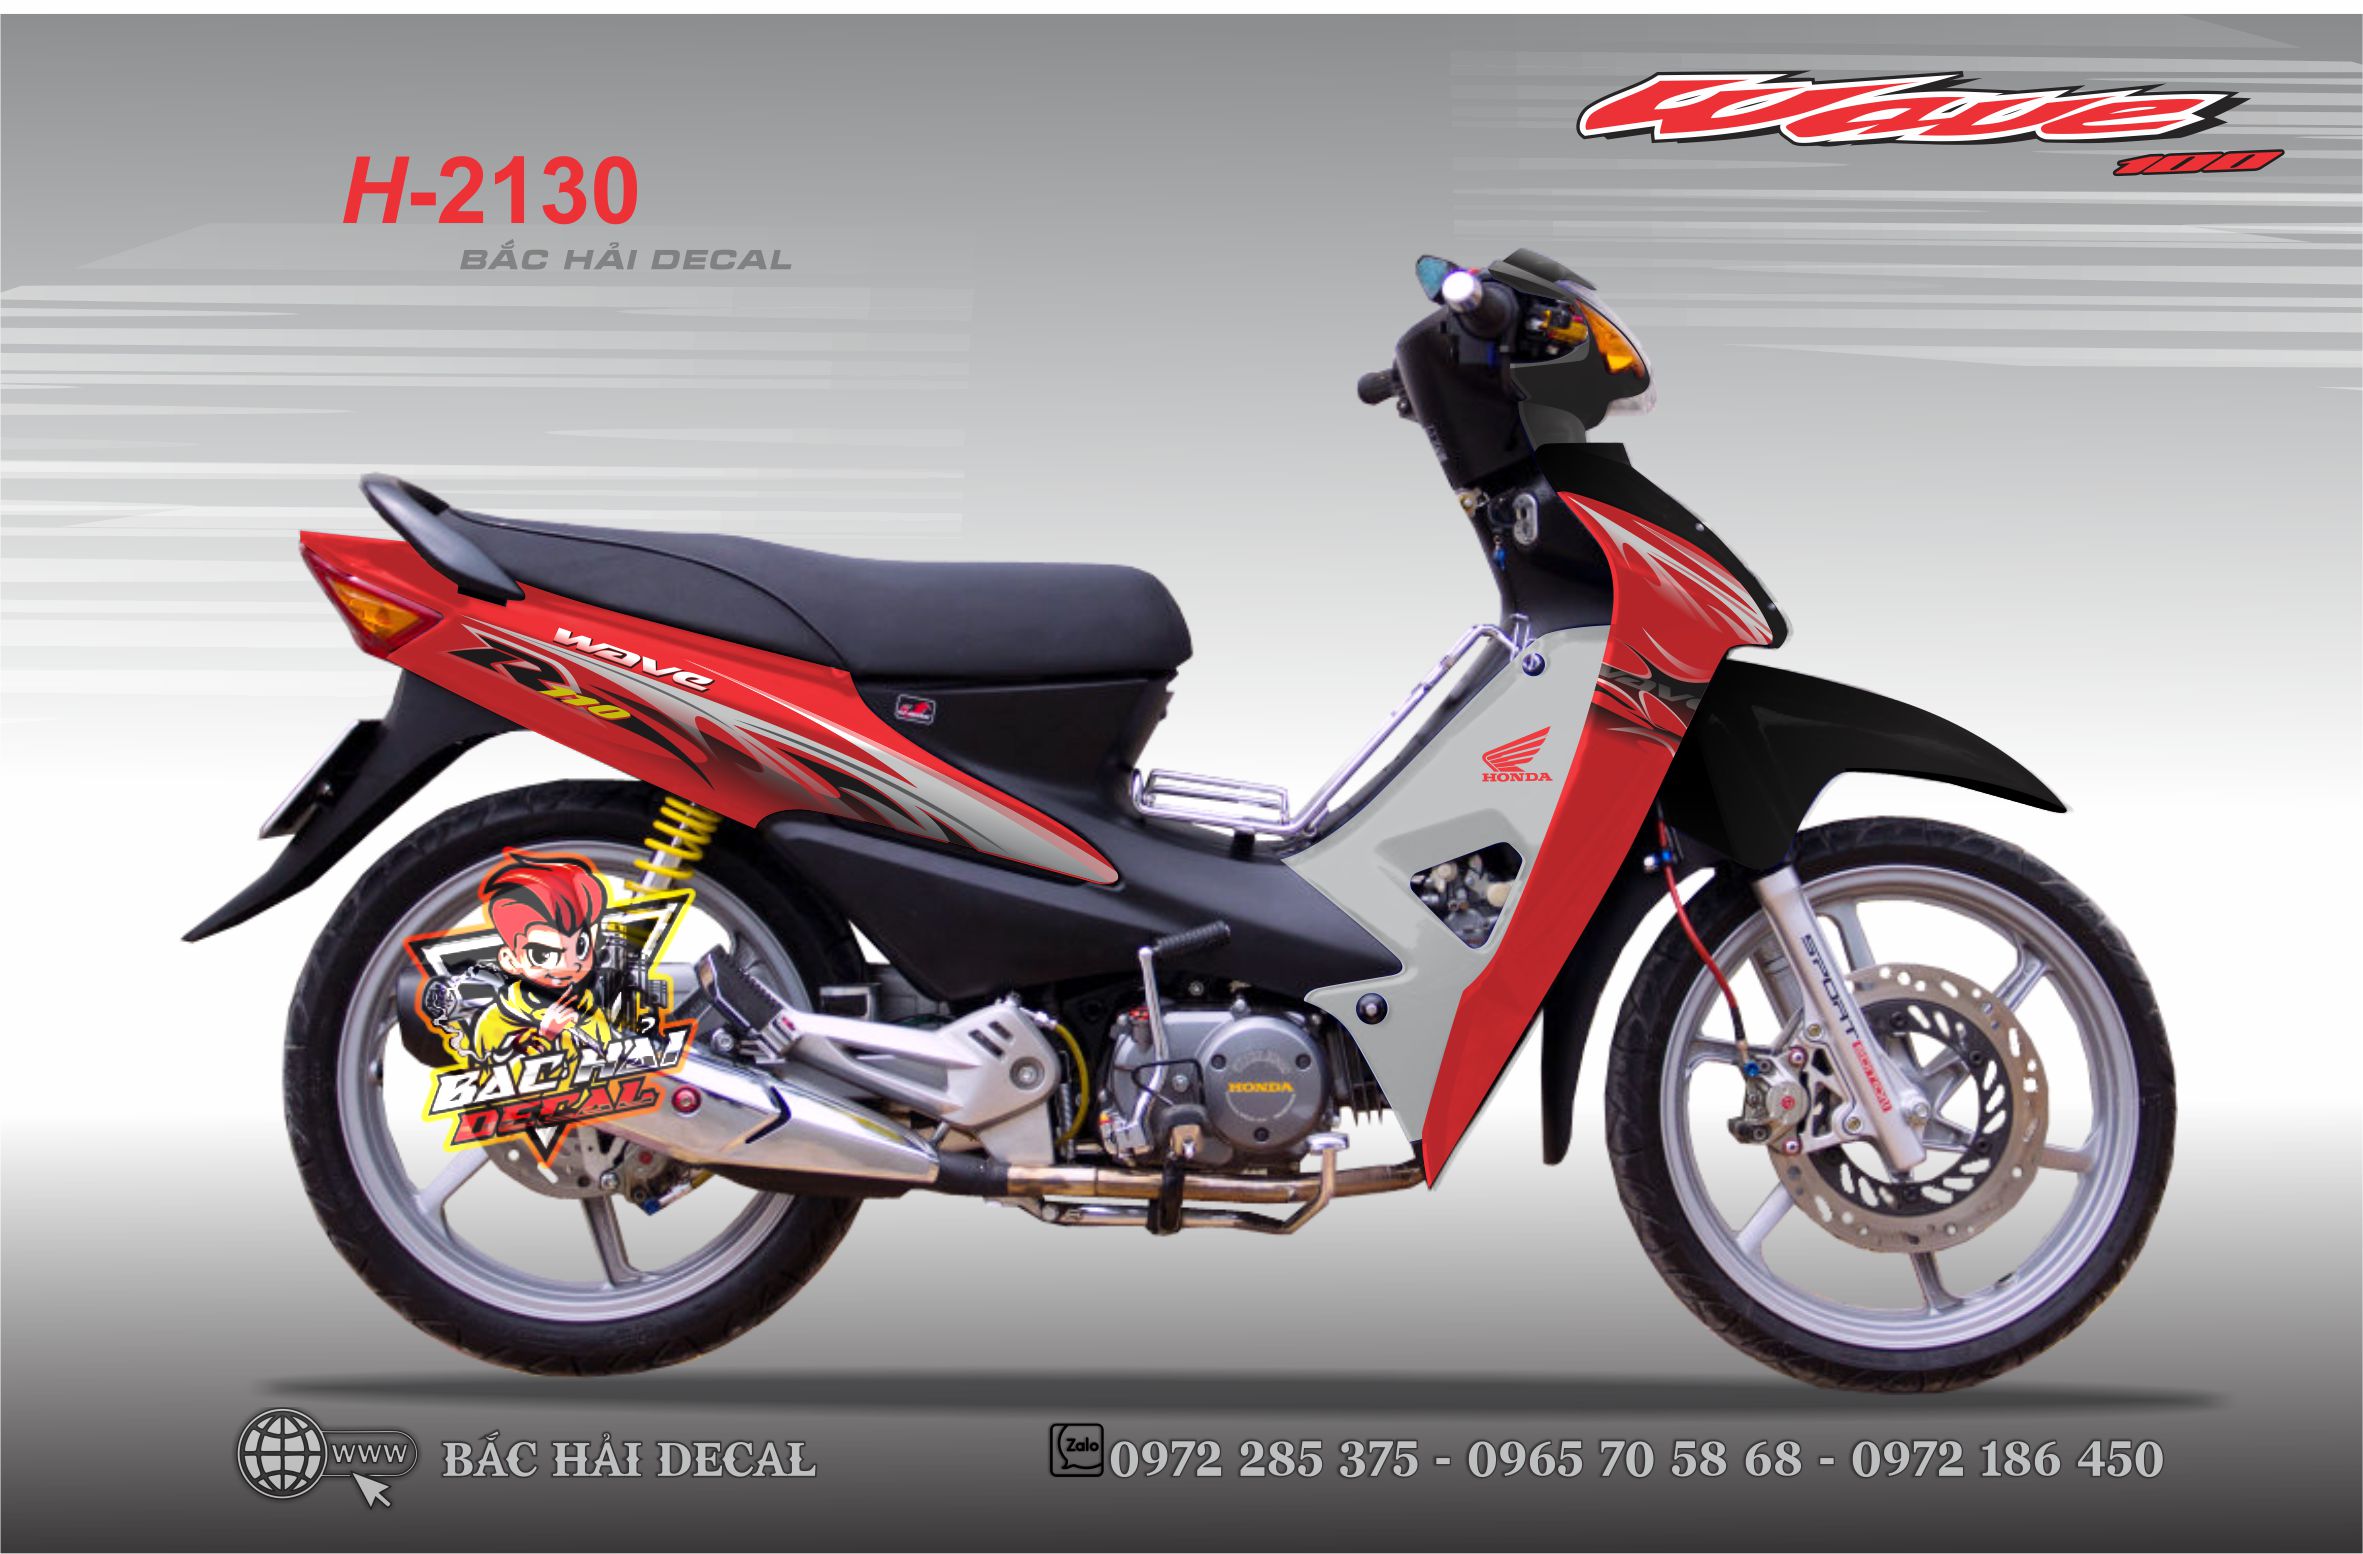 HONDA WAVE 110 R PRICE AND DOWNPAYMENT 2021  DISC BRAKE  YouTube